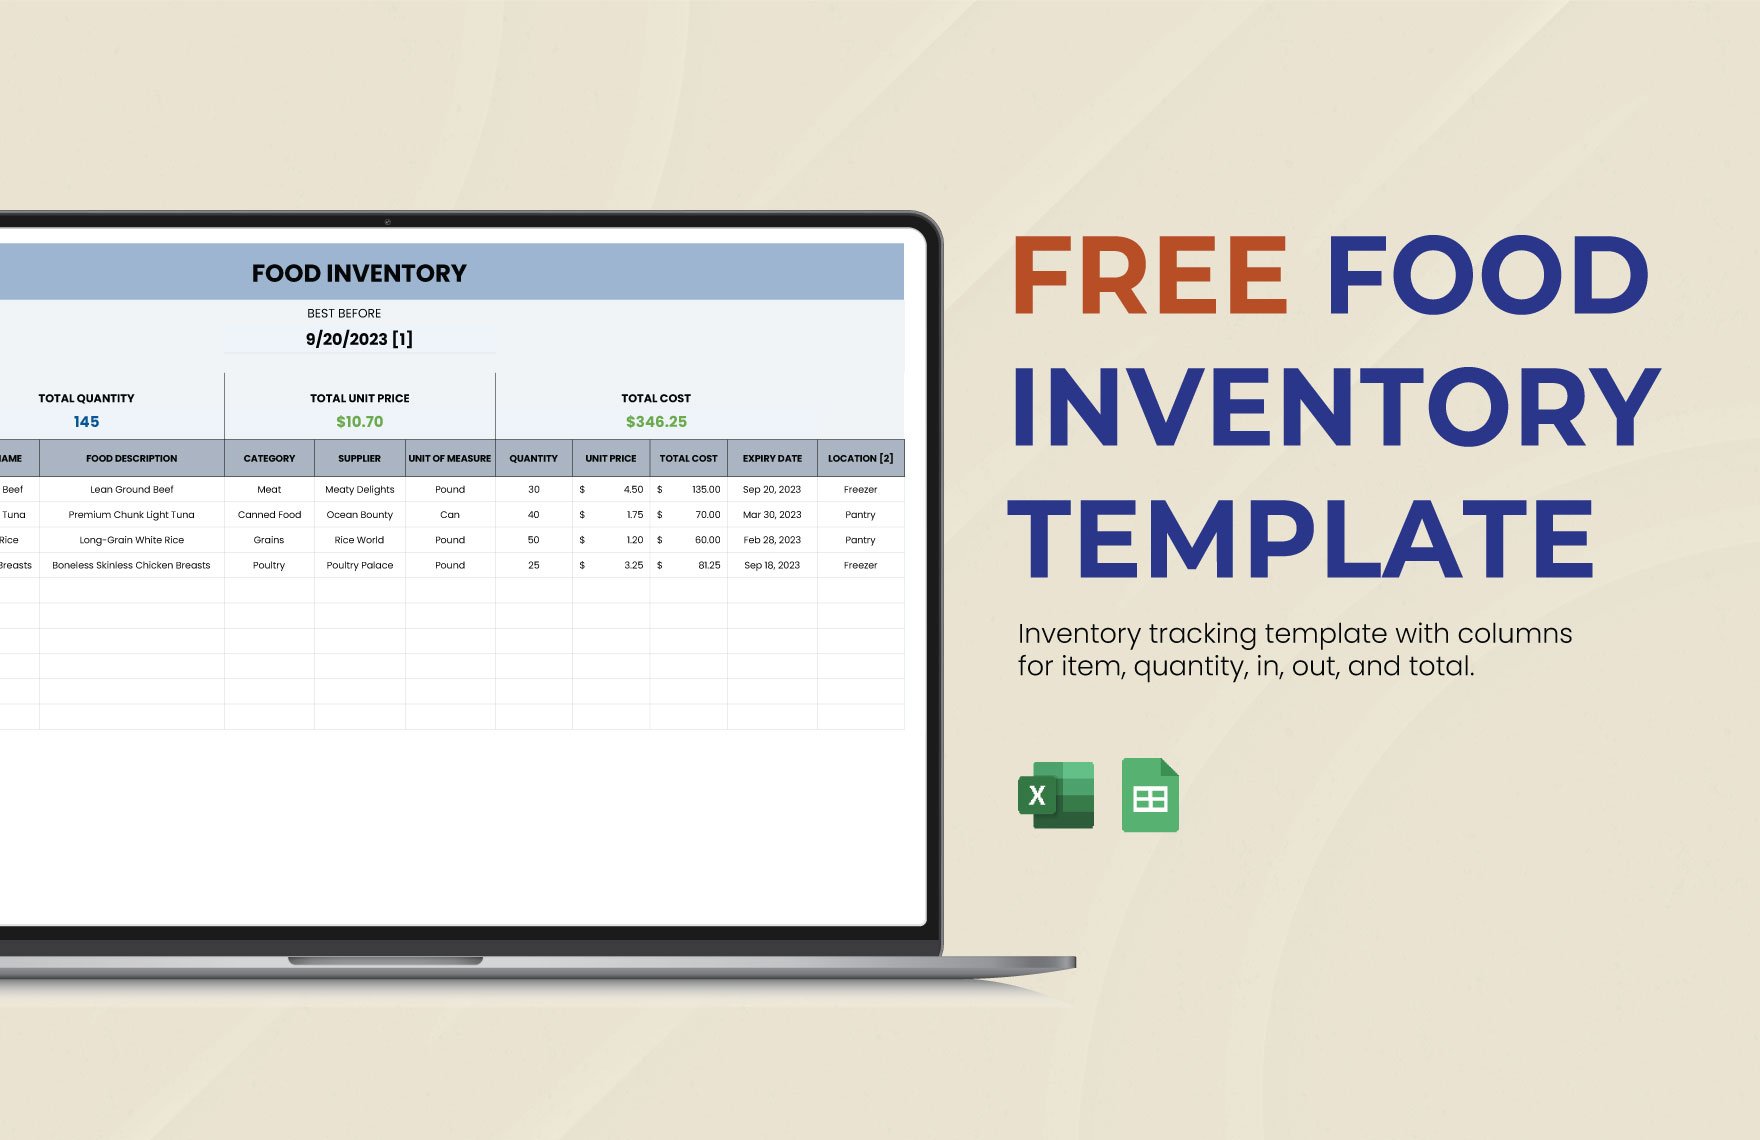 Food Inventory Template